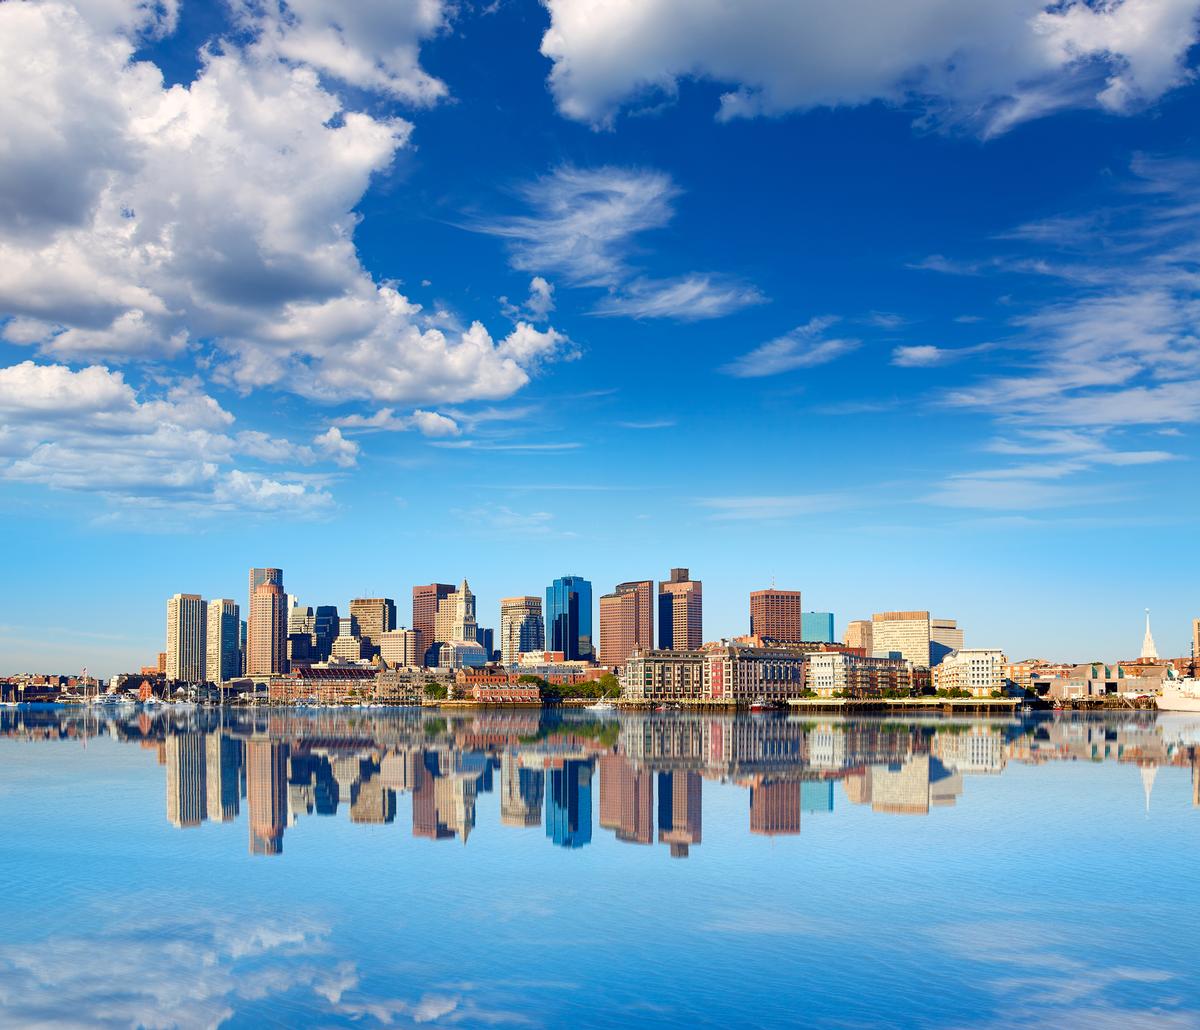 The 2021 Global Wellness Summit will mark the event's 15th anniversary and will be hosted in Boston / Shutterstock/lunamarina